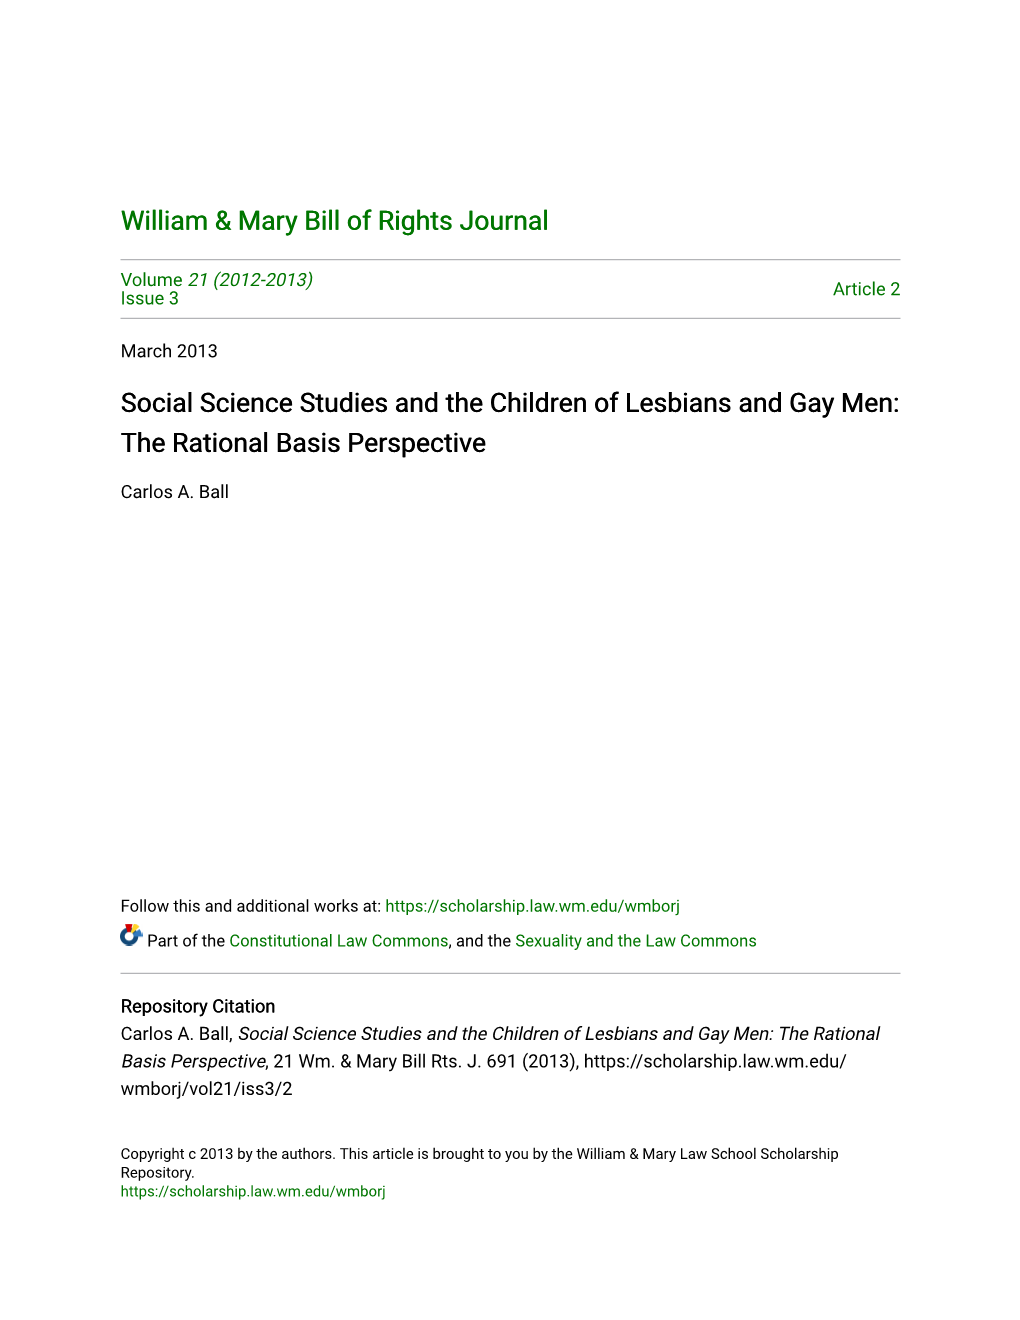 Social Science Studies and the Children of Lesbians and Gay Men: the Rational Basis Perspective